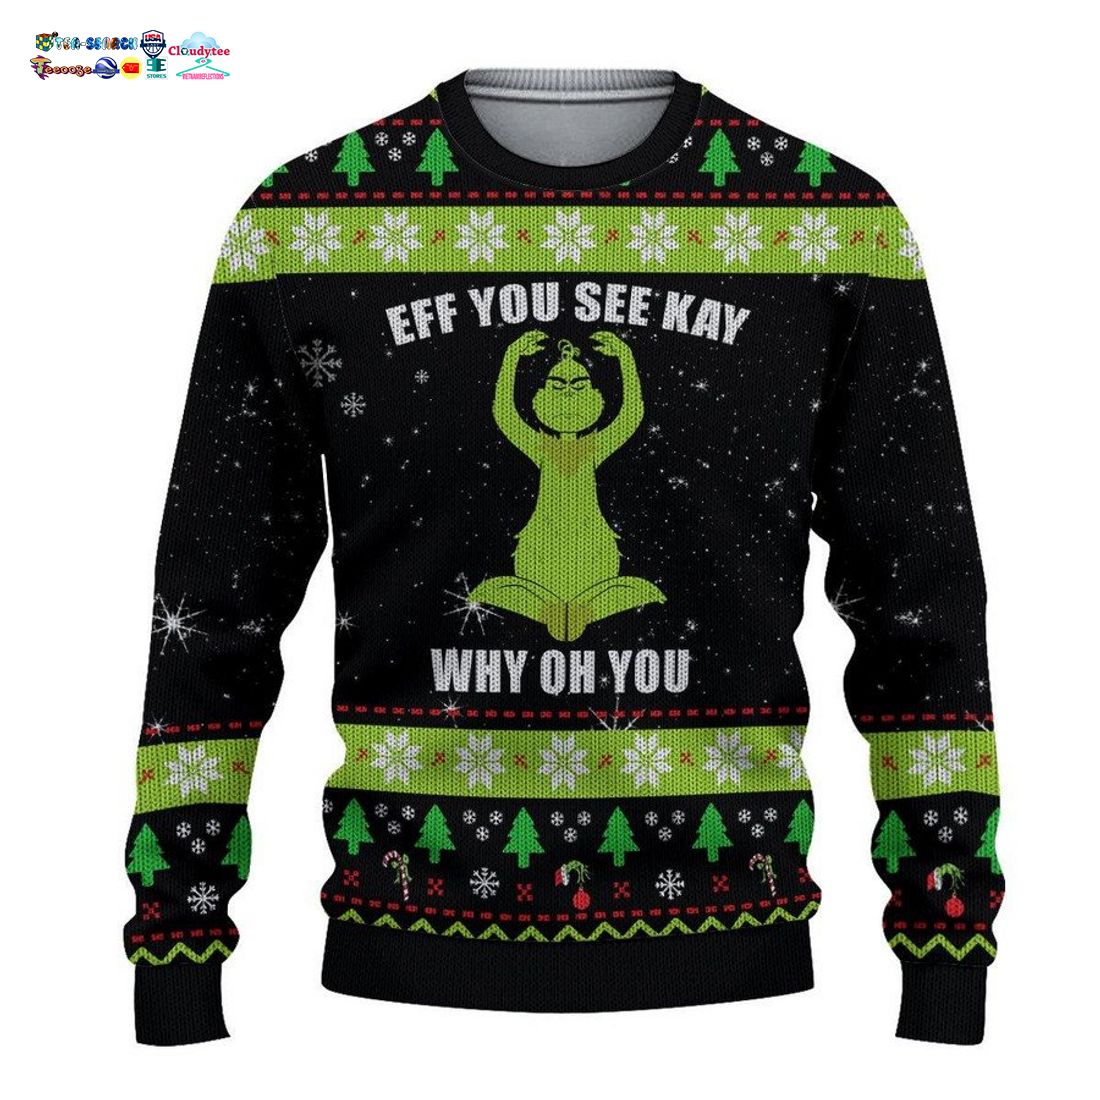 Grinch Eff You See Kay Why Oh You Ugly Christmas Sweater - It is too funny